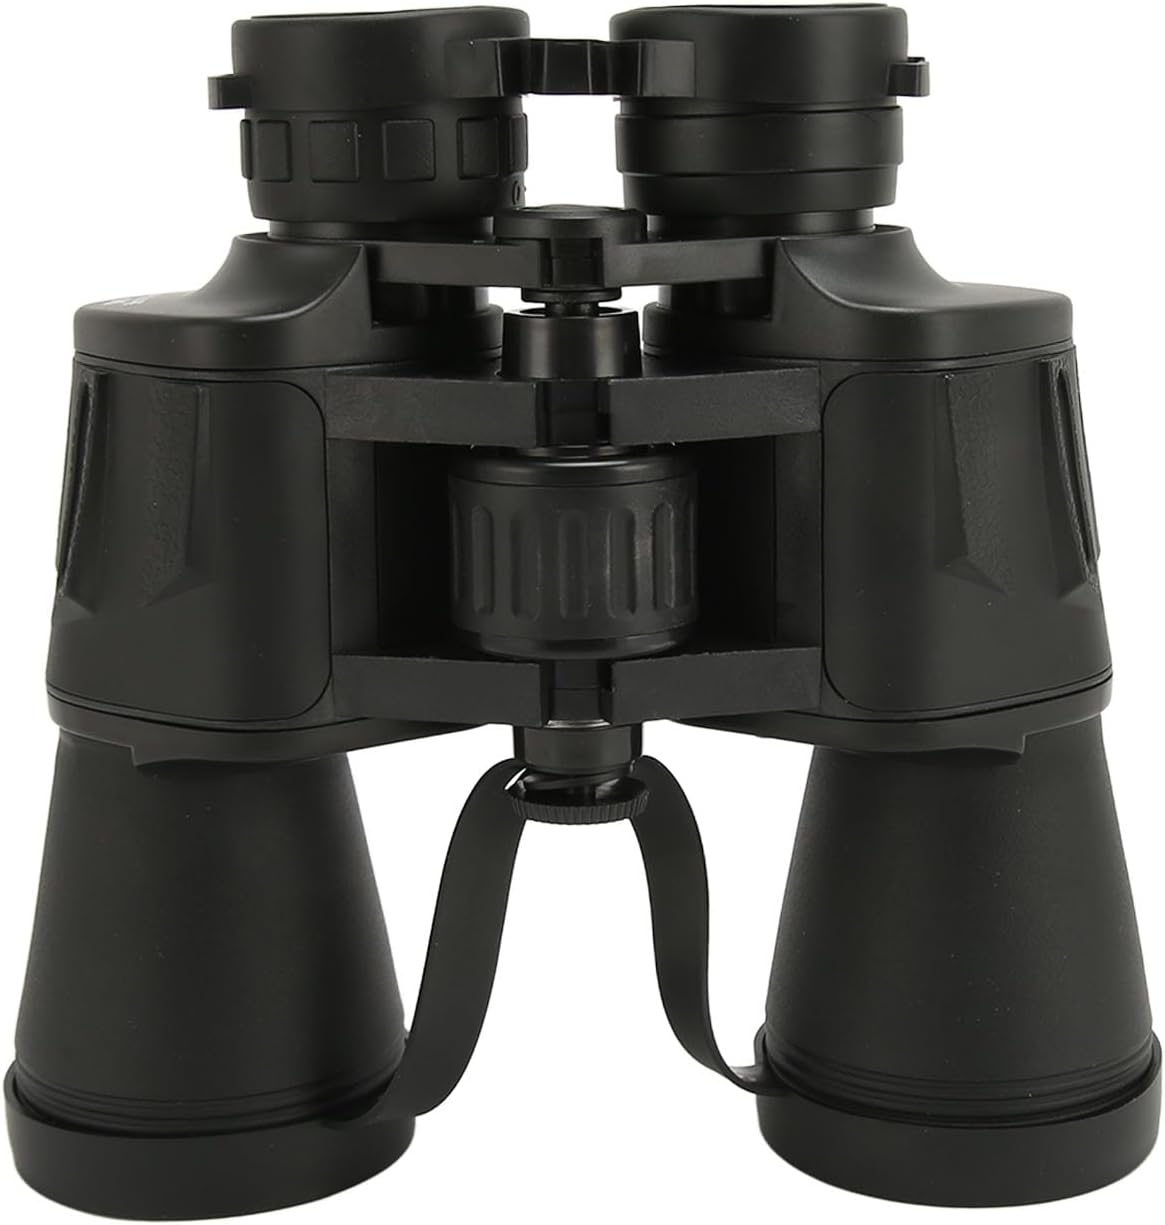 Super Bright 10x Zoom Lens Binoculars, Comfortable to Use, Large Objective Lens, Versatile Application for Bird Watching, Concerts